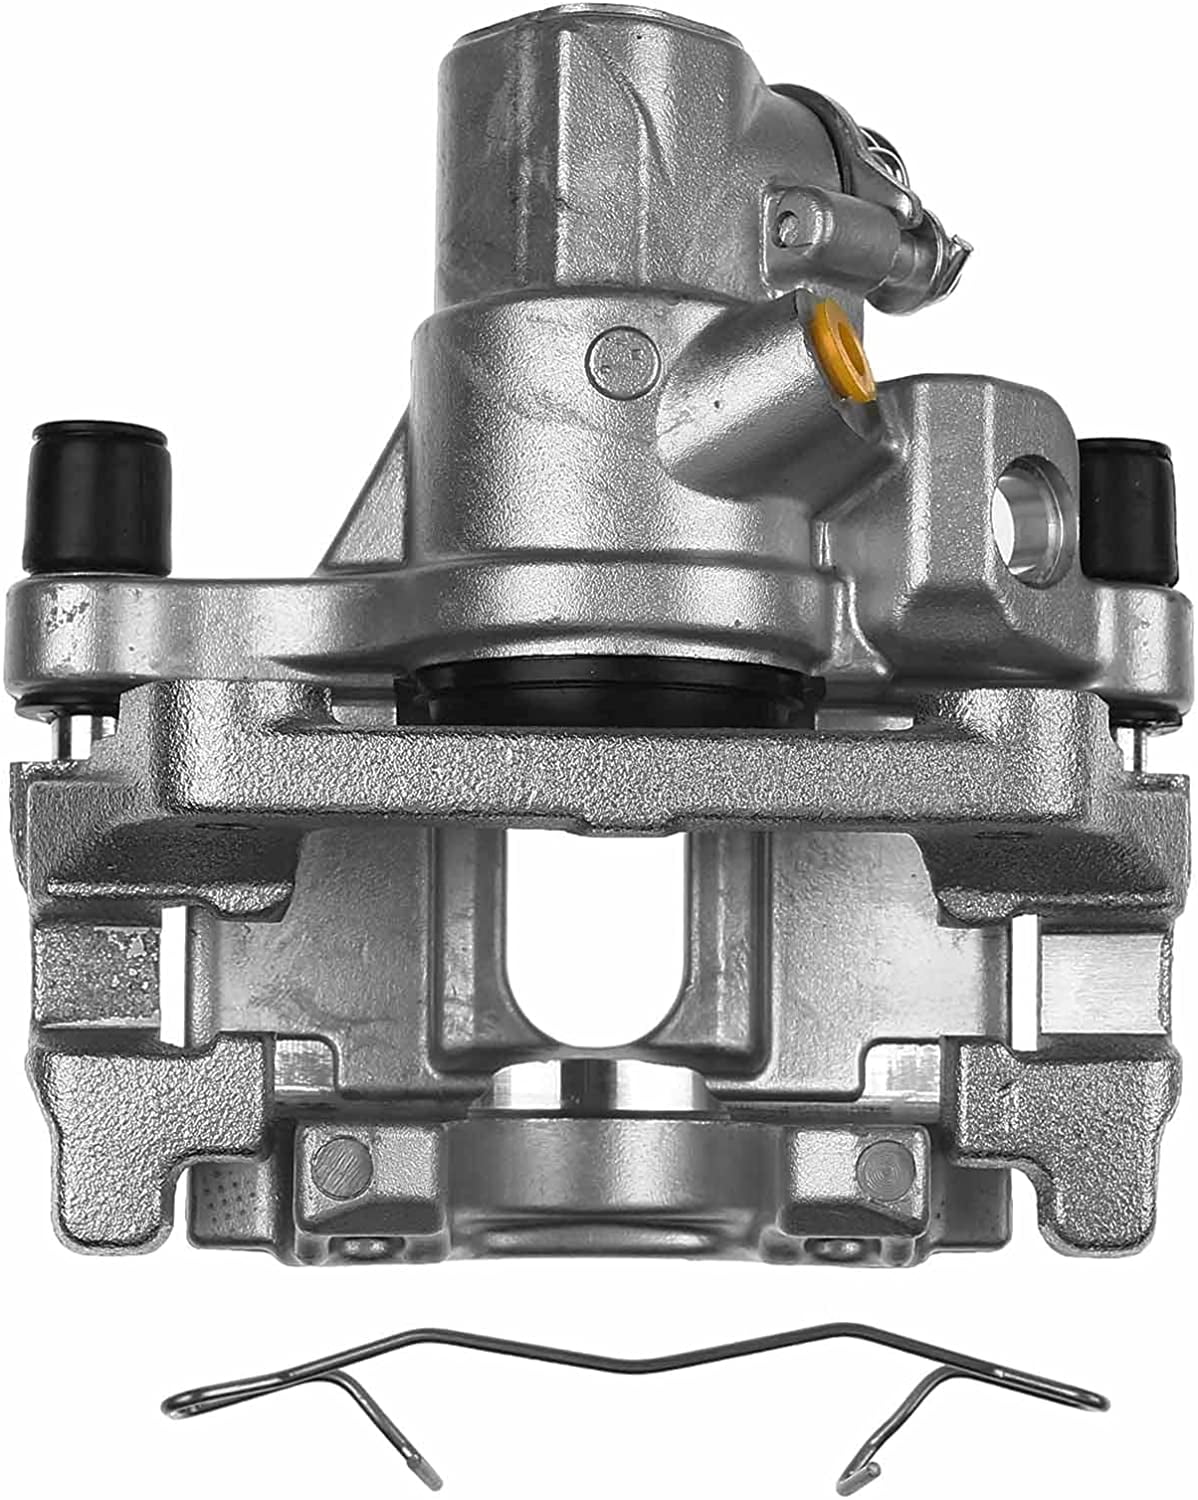 A-Premium Brake Caliper Assembly with Bracket Compatible with Ford Focus 2012-2018 EcoSport 2018-2020 Rear Left and Right Side 2-PC Set 